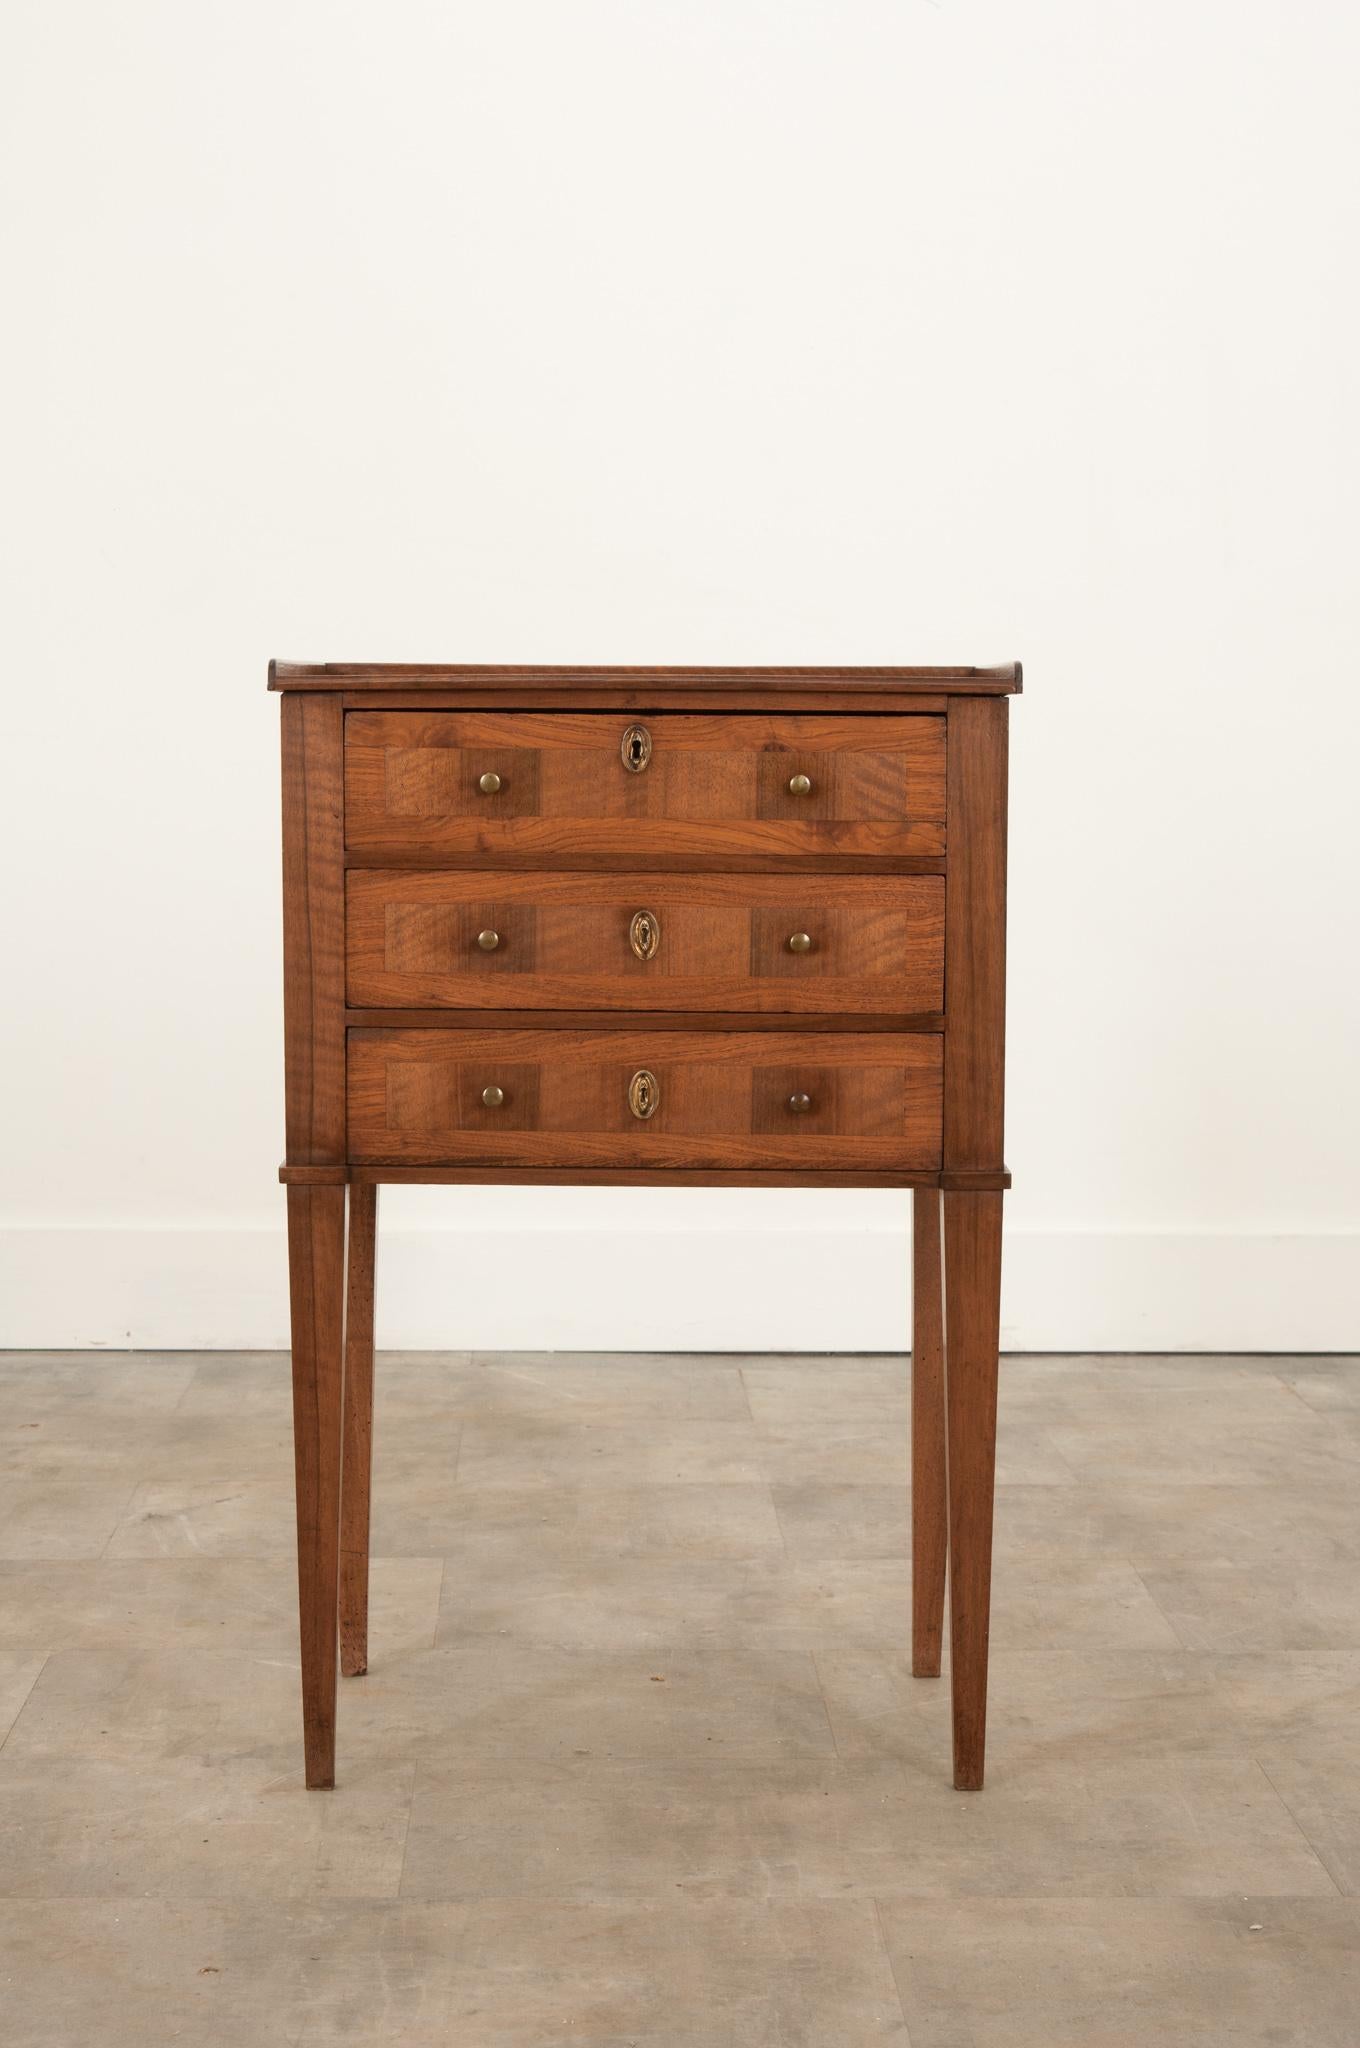 This darling petite commode was crafted in France, circa 1880, from a mix of vibrant woods. The top features a 3/4th gallery and molded edge. Three drawers each have a pair of simple brass pulls and an oval escutcheon. The top drawer neatly hides a